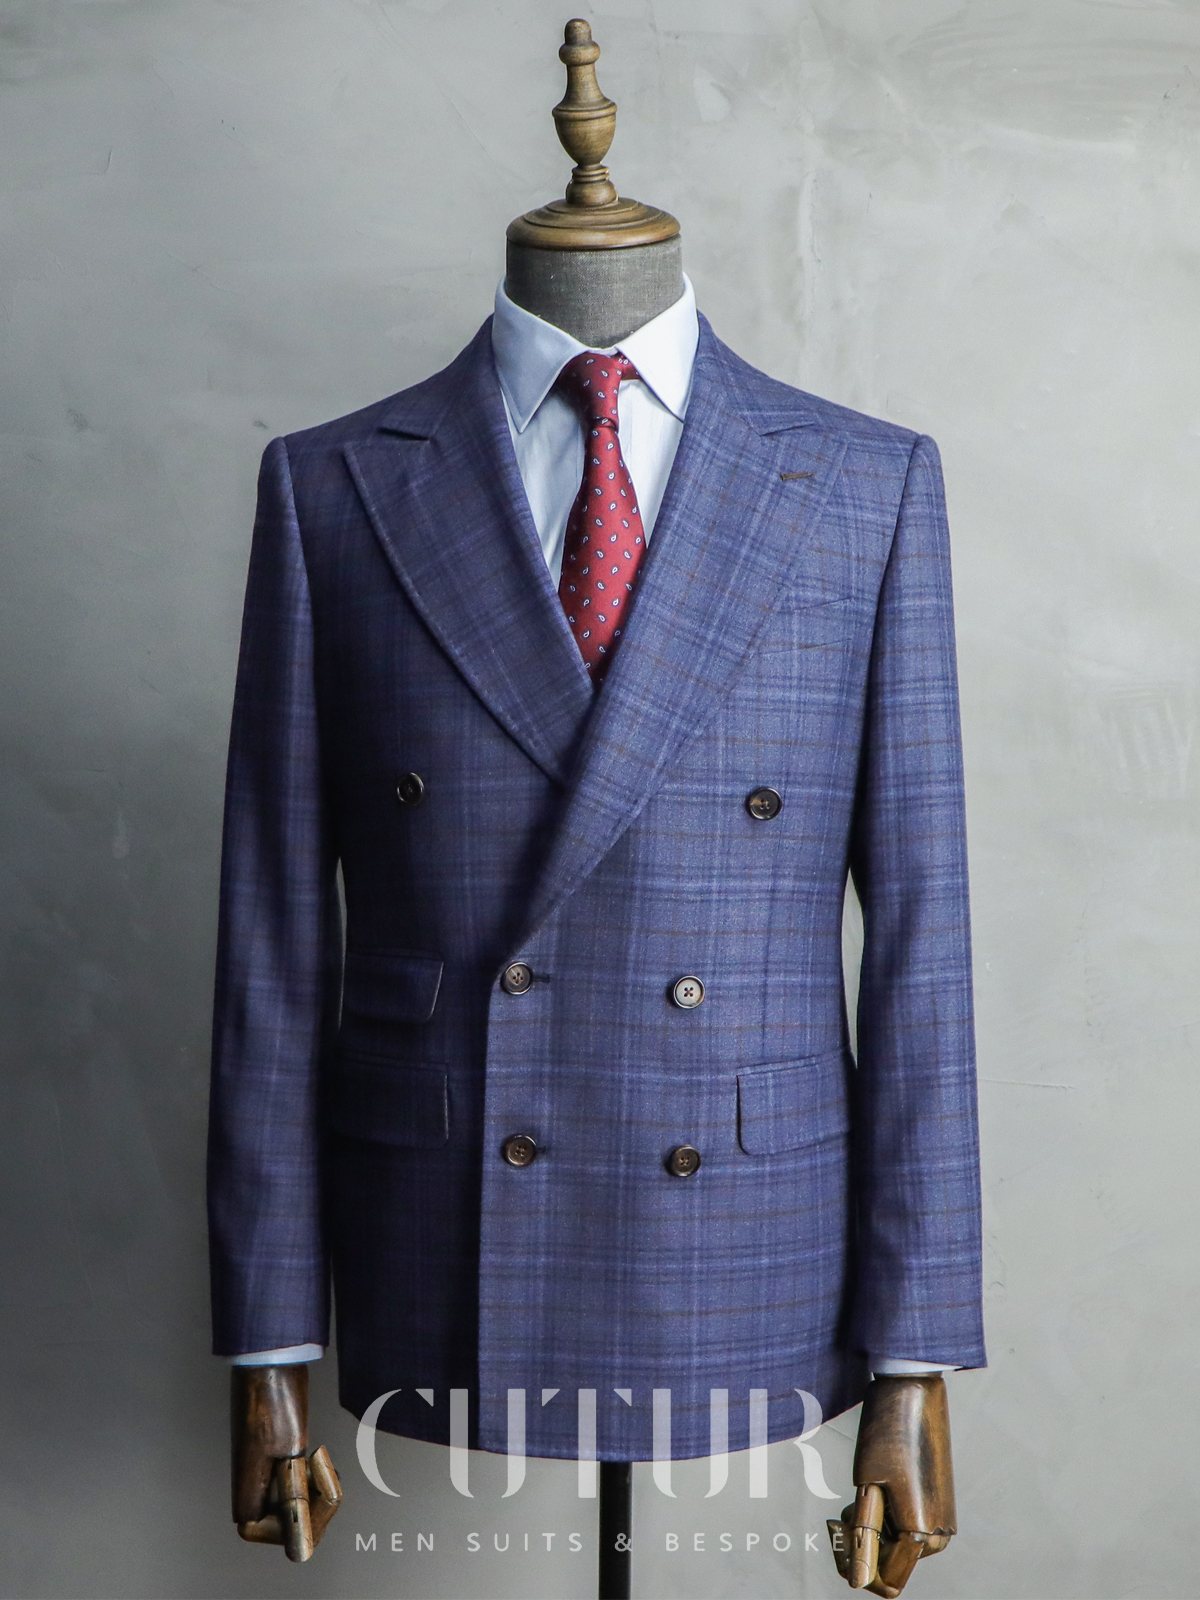 【Green Label】Rounded Peaked Laple Soft British Suit